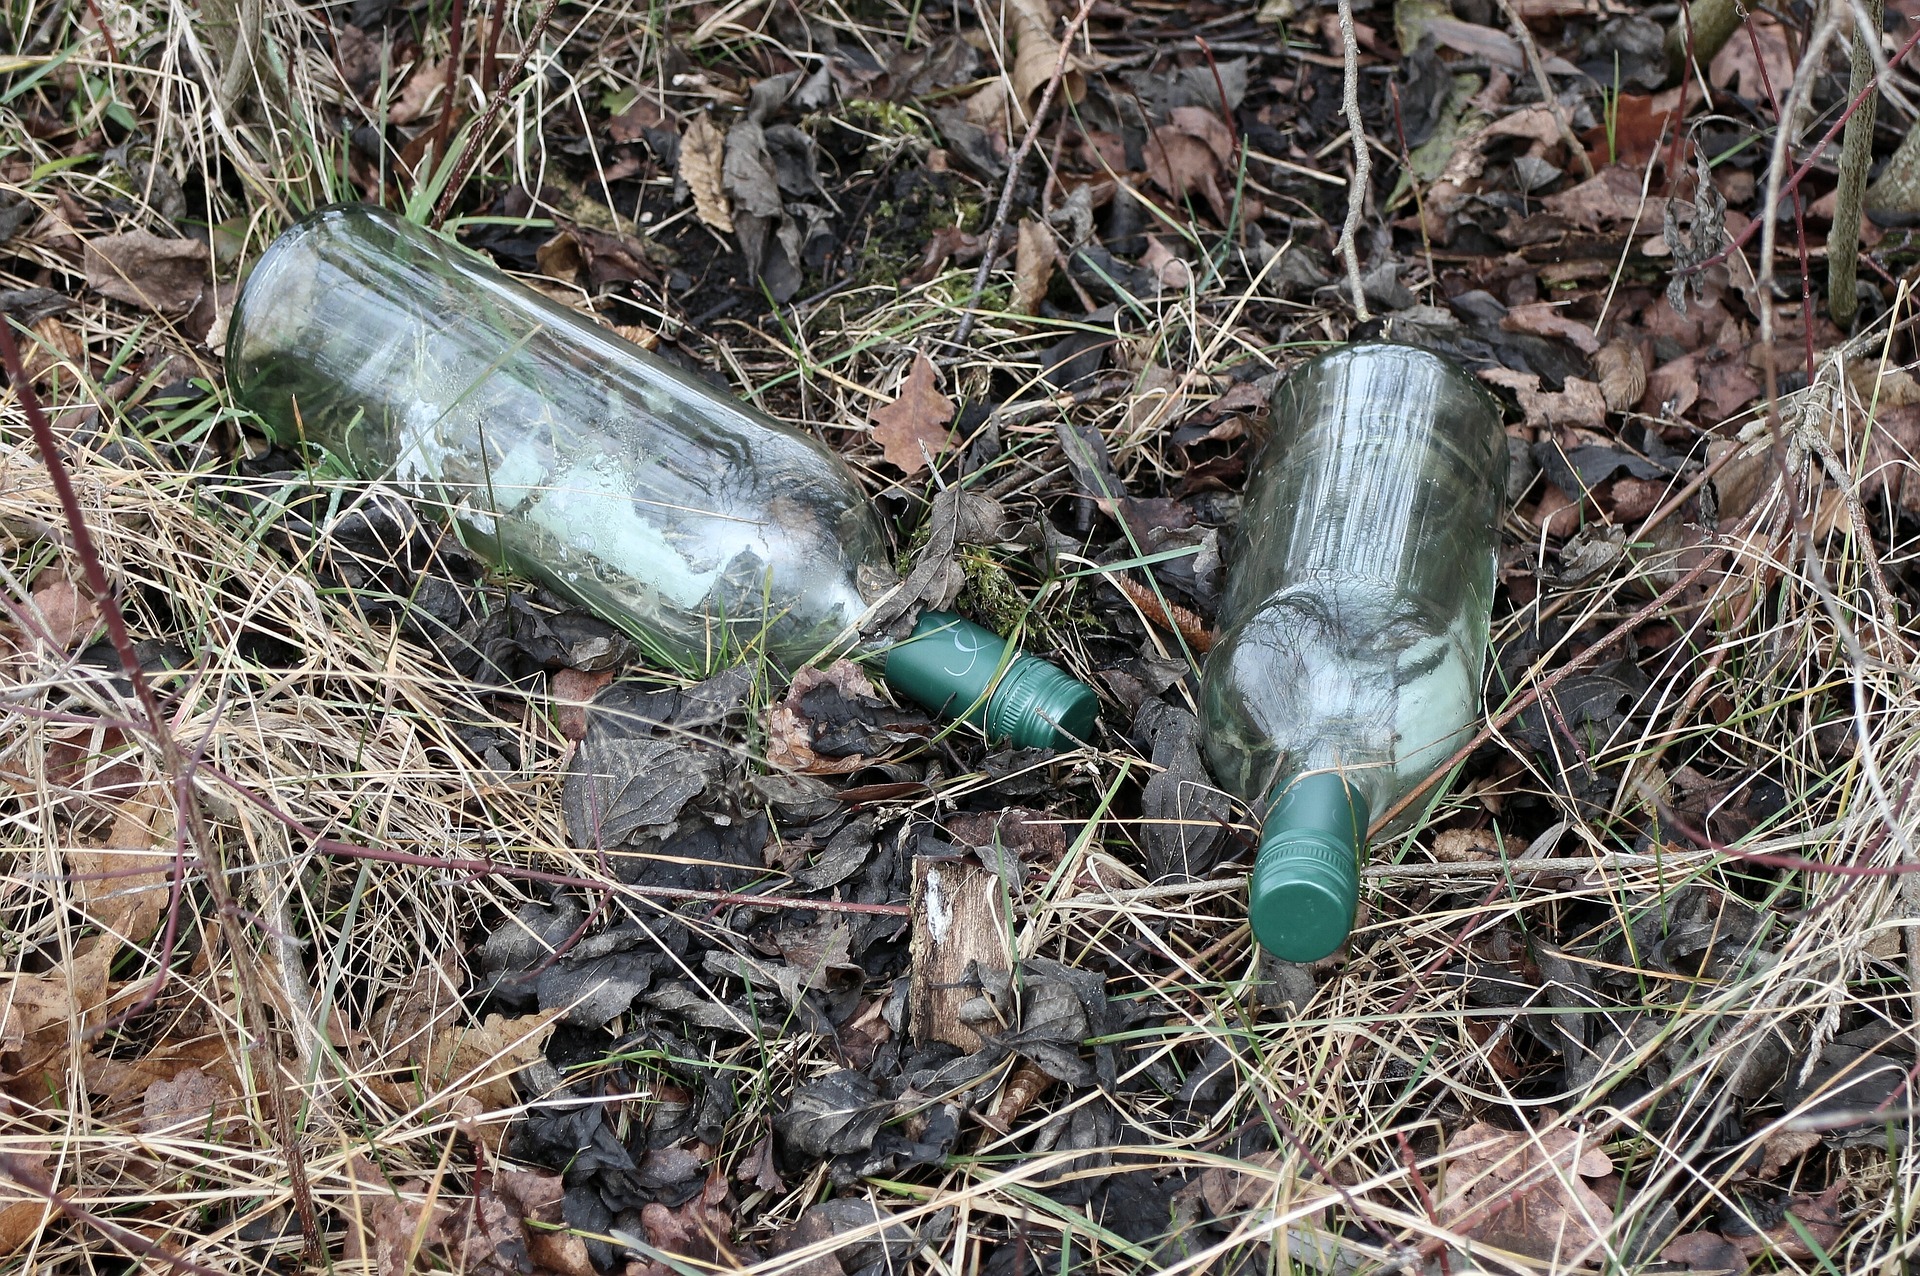 Shows Bottles Thrown On The Ground